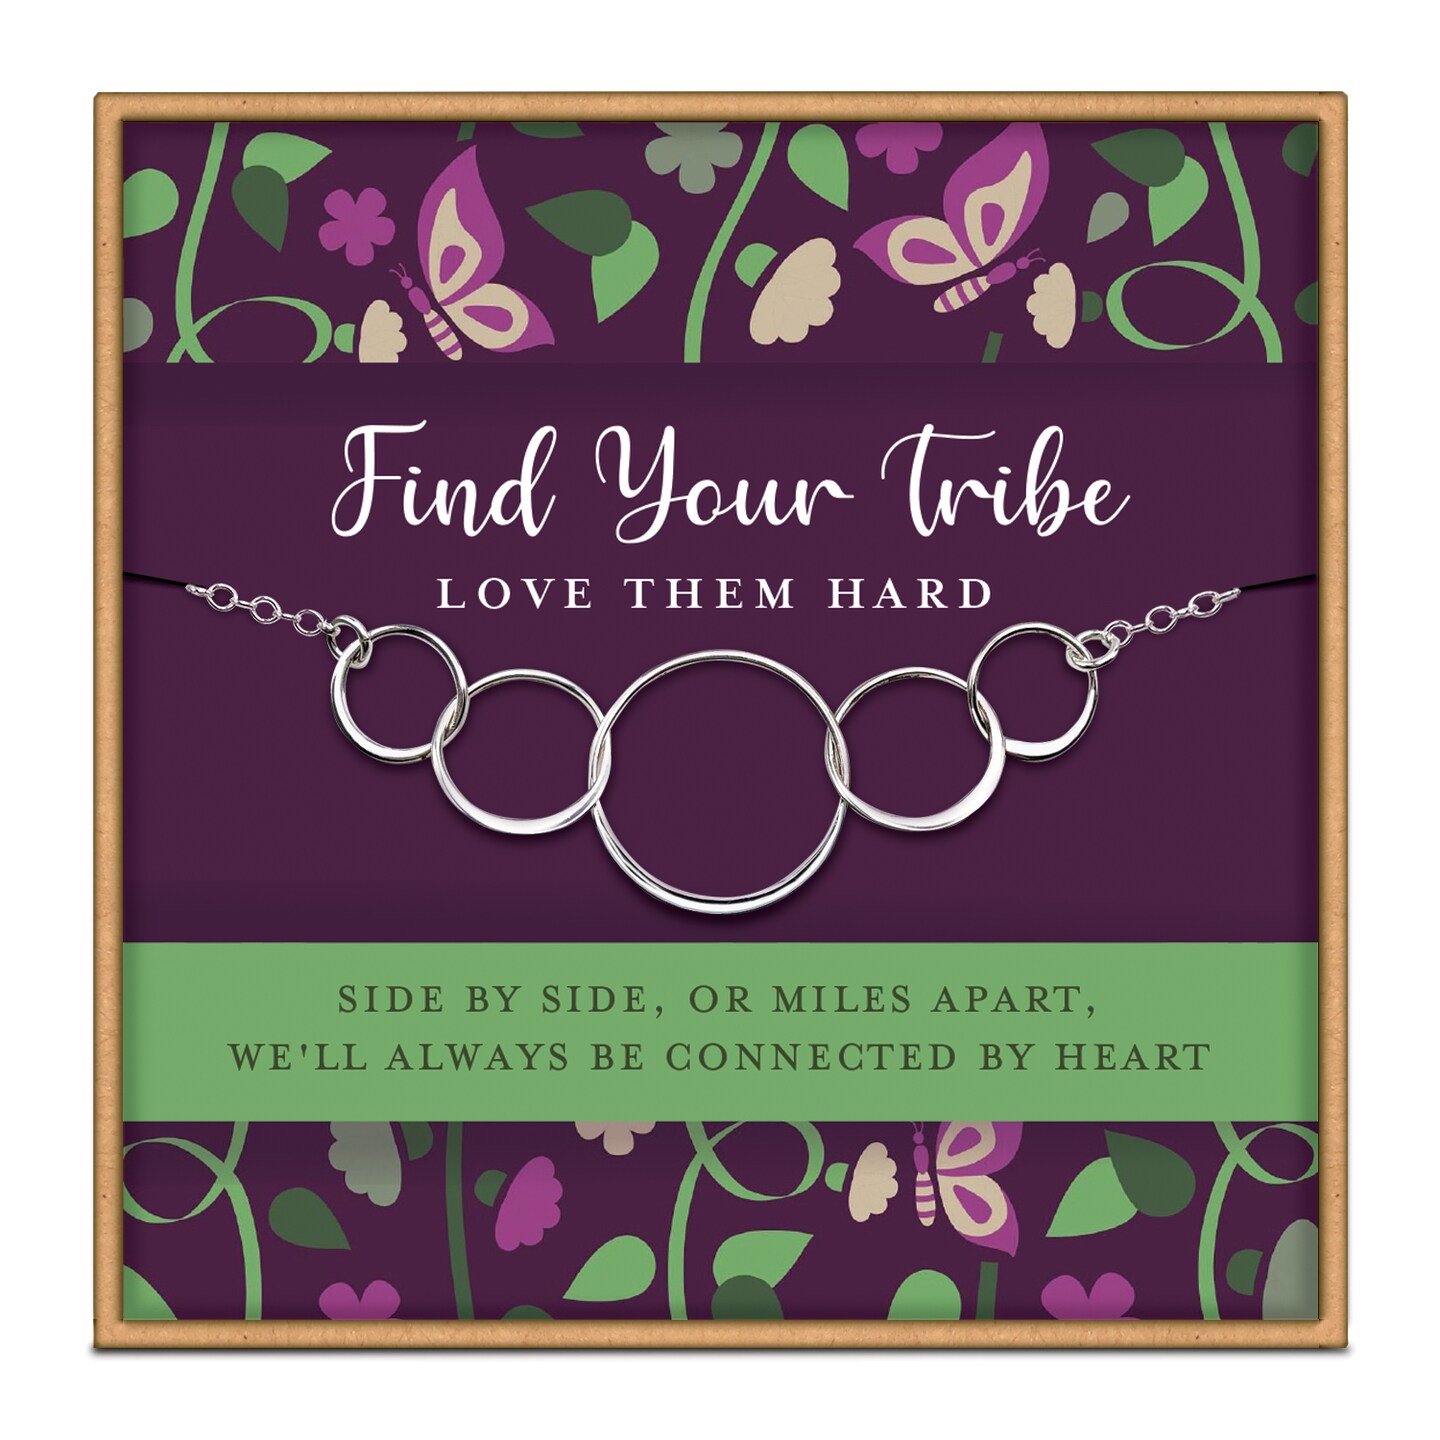 Best friend gifts celebrate your friends find your tribe love them